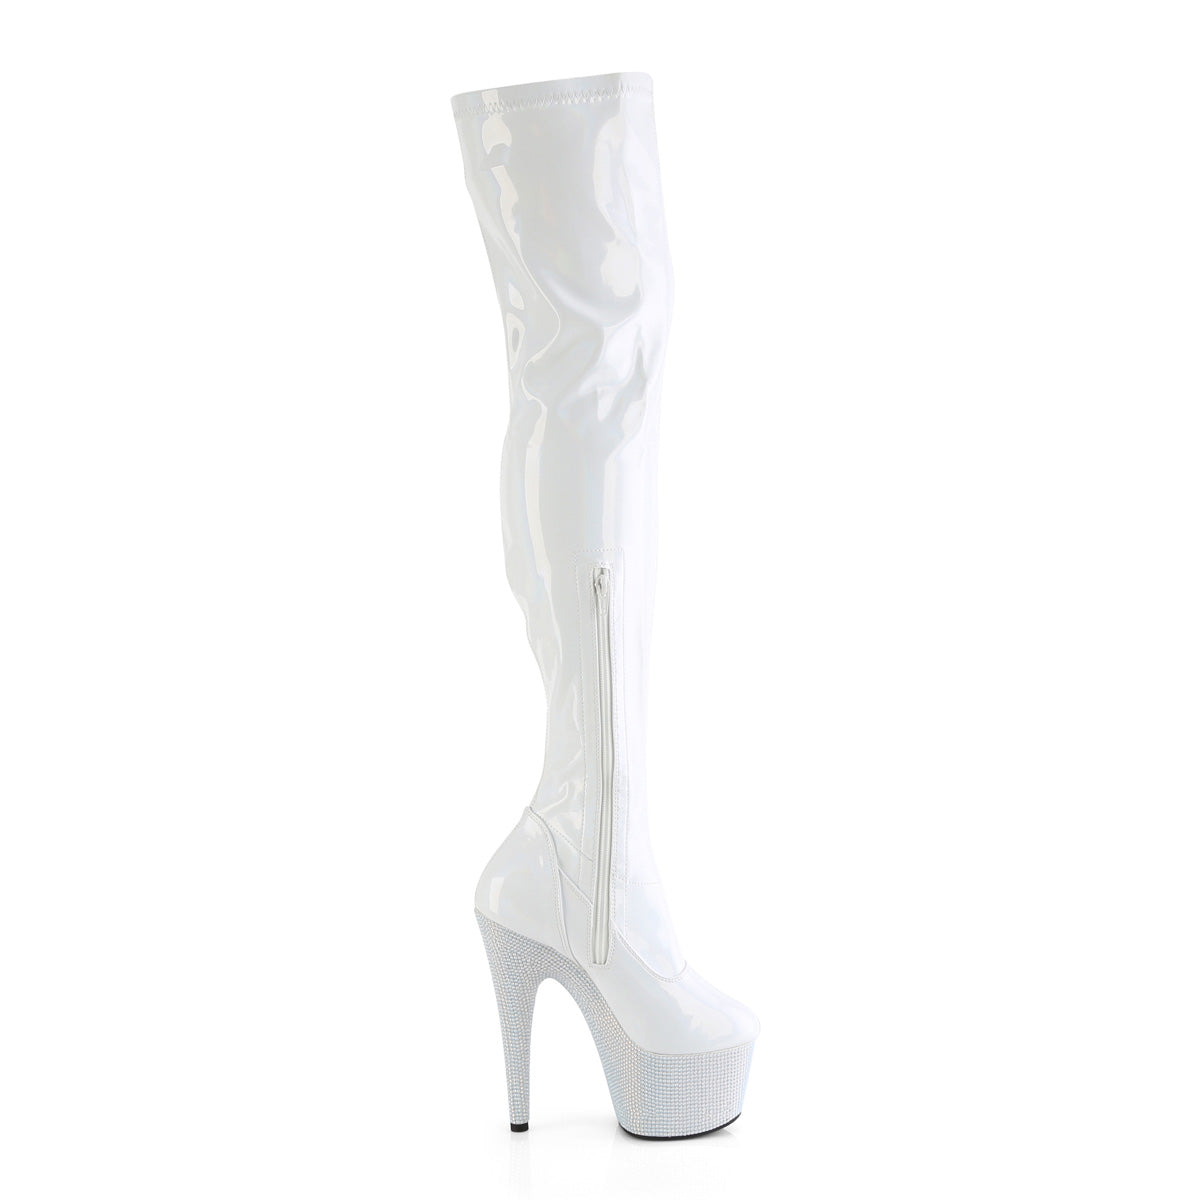 BEJEWELED-3000-7 Pleaser White Stretch Holo Patent/White Rhinestones Platform Shoes [Sexy Thigh High Boots]